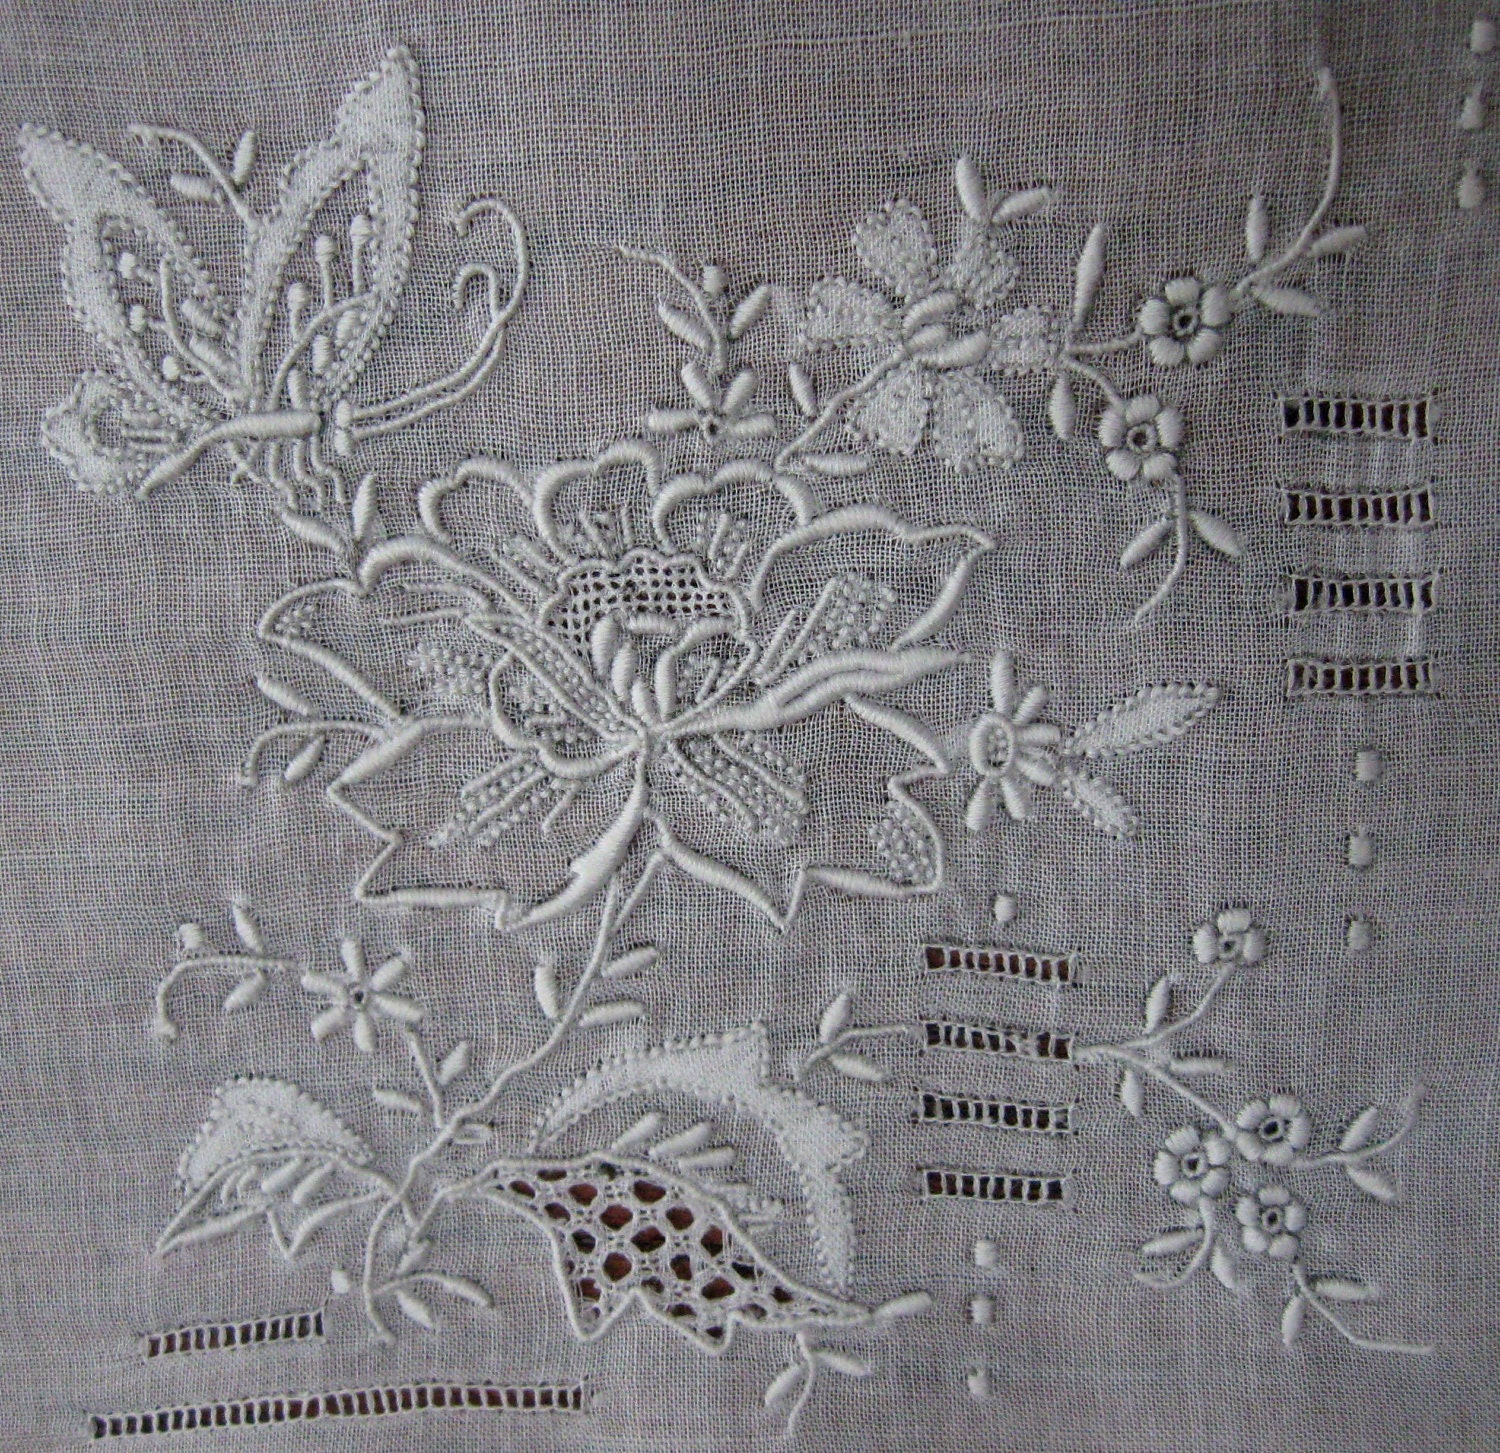 Vintage Wedding Handkerchief Embroidered Open White Work Floral Embroidery 1920s - CinfulOldies